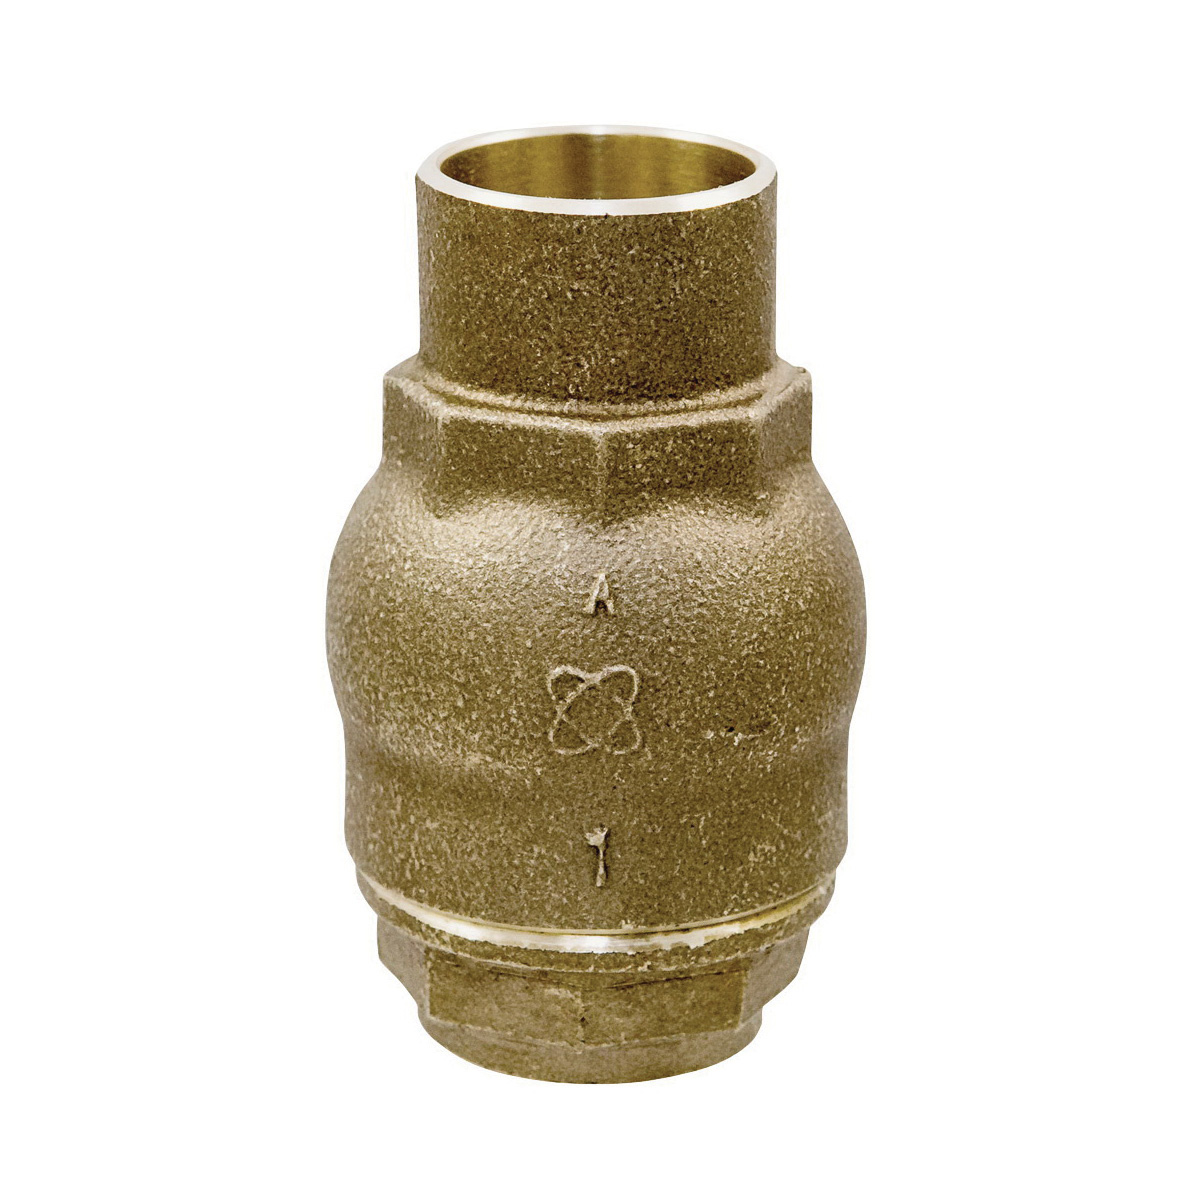 NIBCO® Ring Check® NJ7Q0X6 S-480-Y-LF Lift In-Line Check Valve, 1/2 in Nominal, Solder End Style, 125 lb, Low Lead Compliance: Yes, Bronze Body, Domestic